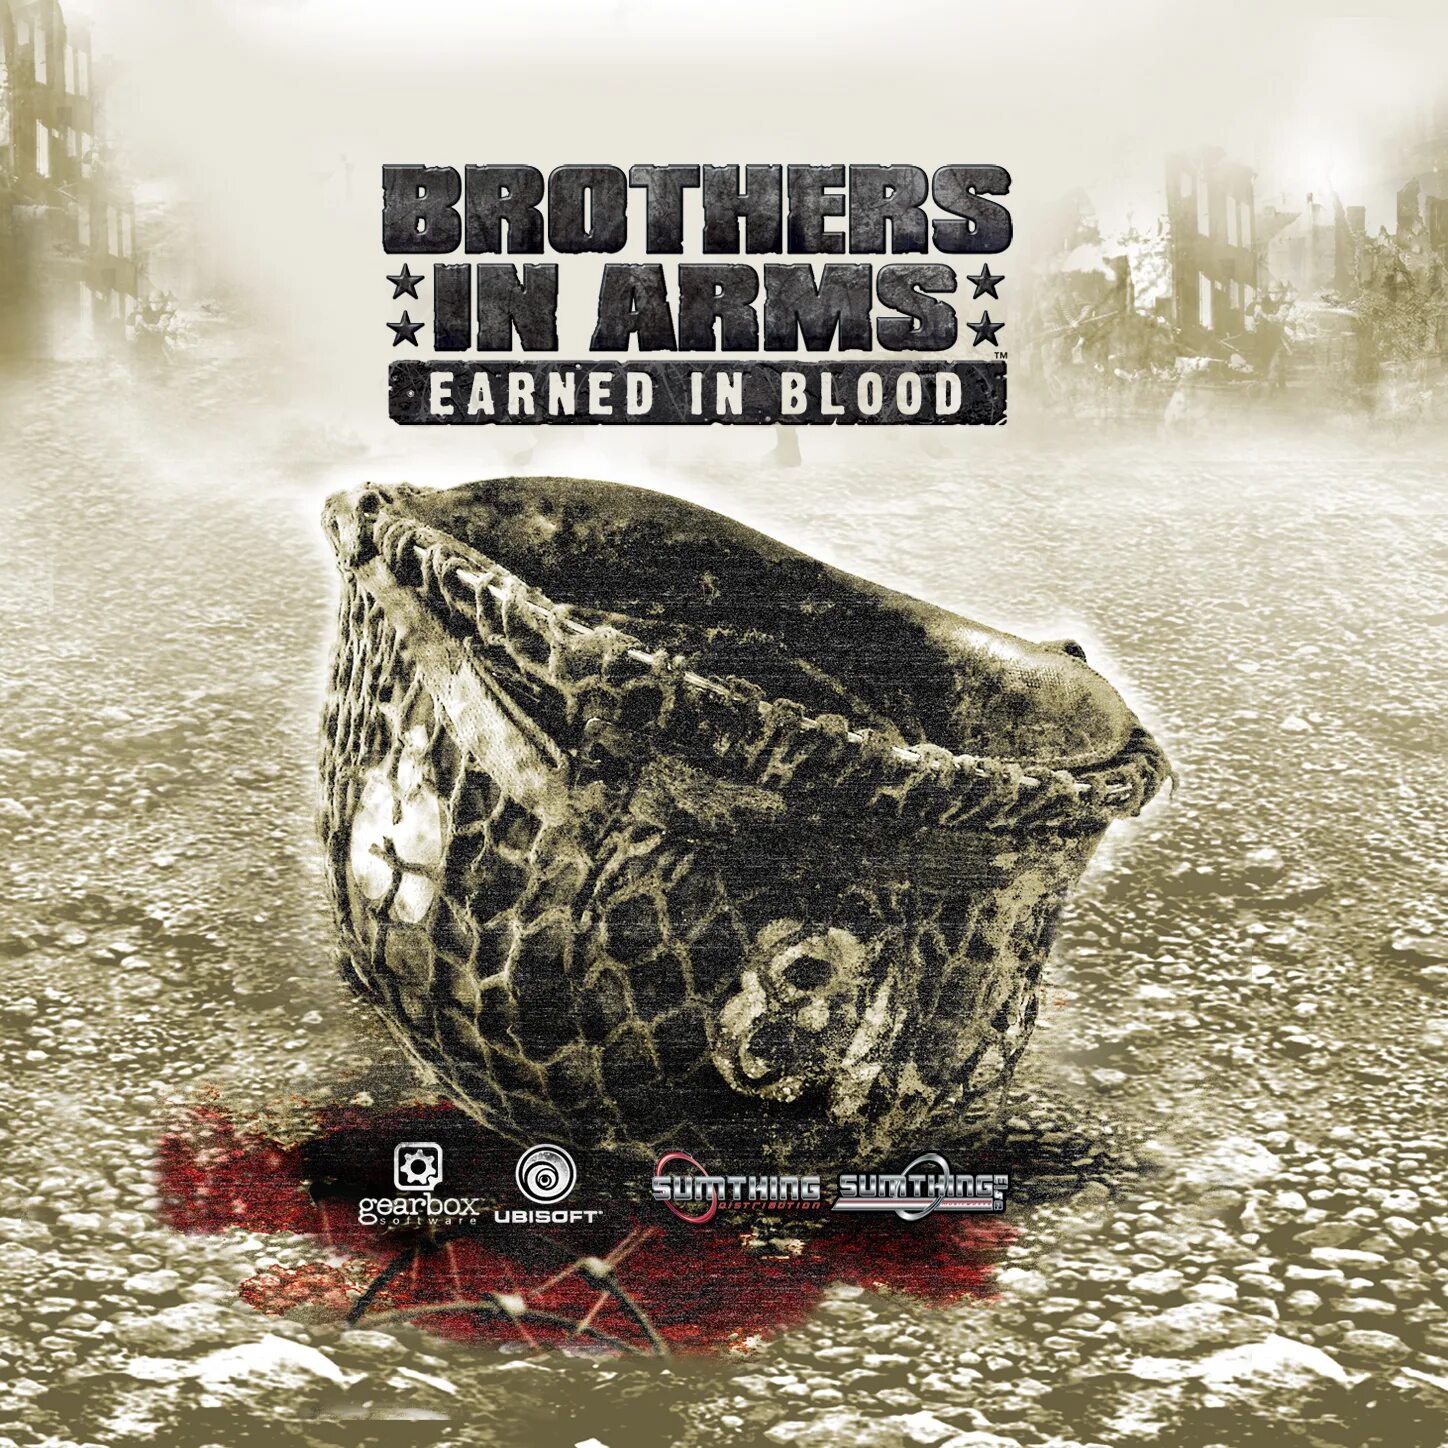 Кровь ост. Brothers in Arms: earned in Blood. Brothers in Arms: earned in Blood (2005). Brothers in Arms earned in. Brothers in Arms earned in Blood ps2 обложка.